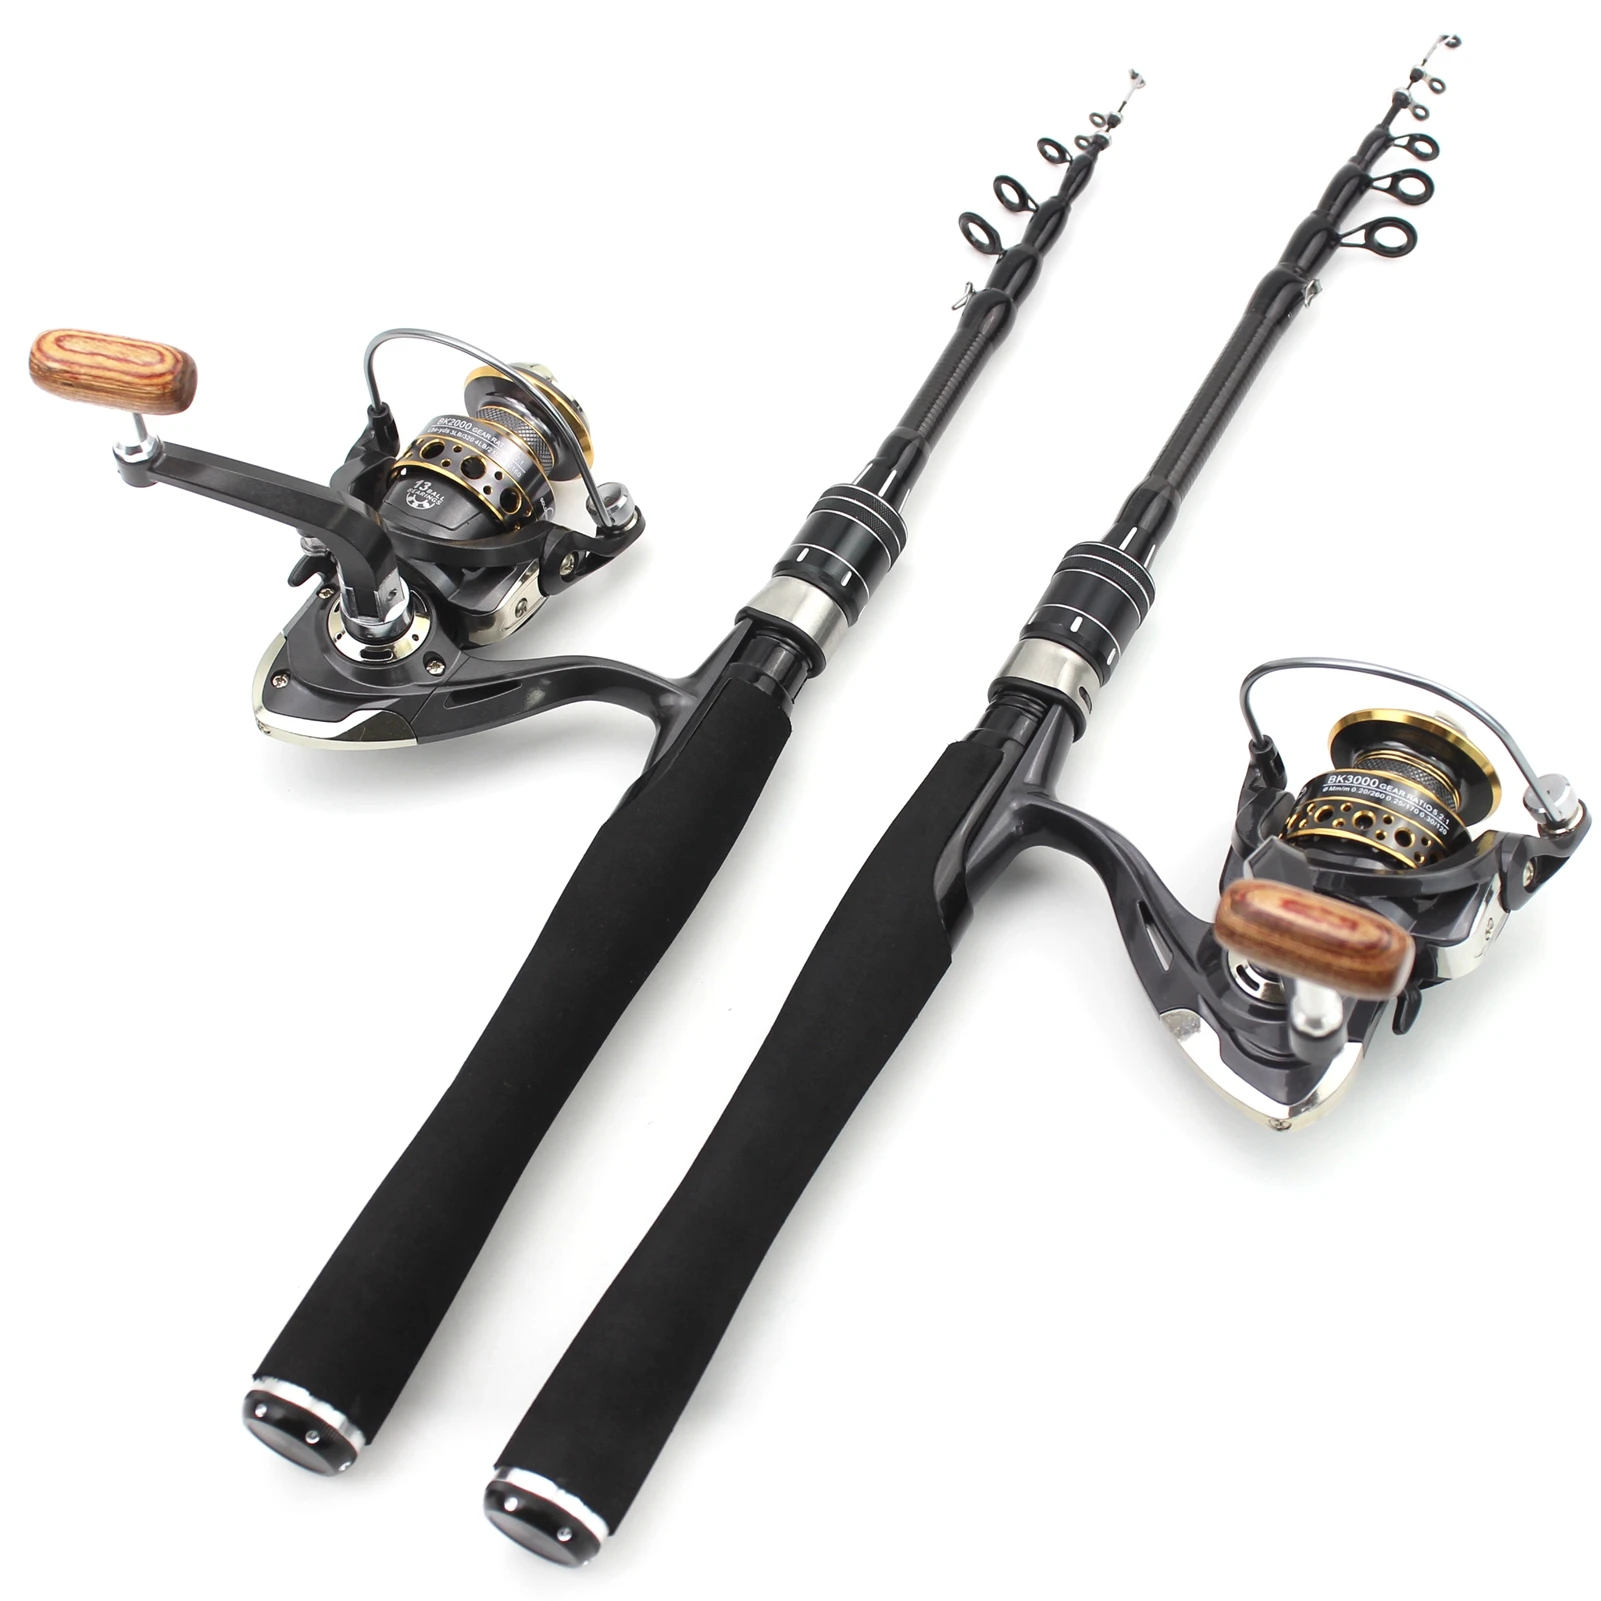 NEW 1.5M 1.8M ul power Telescopic Fishing Rod and reel set Carbon lure  fishing pole Travel Fishing Tackle Slow fly rod pesca - AliExpress